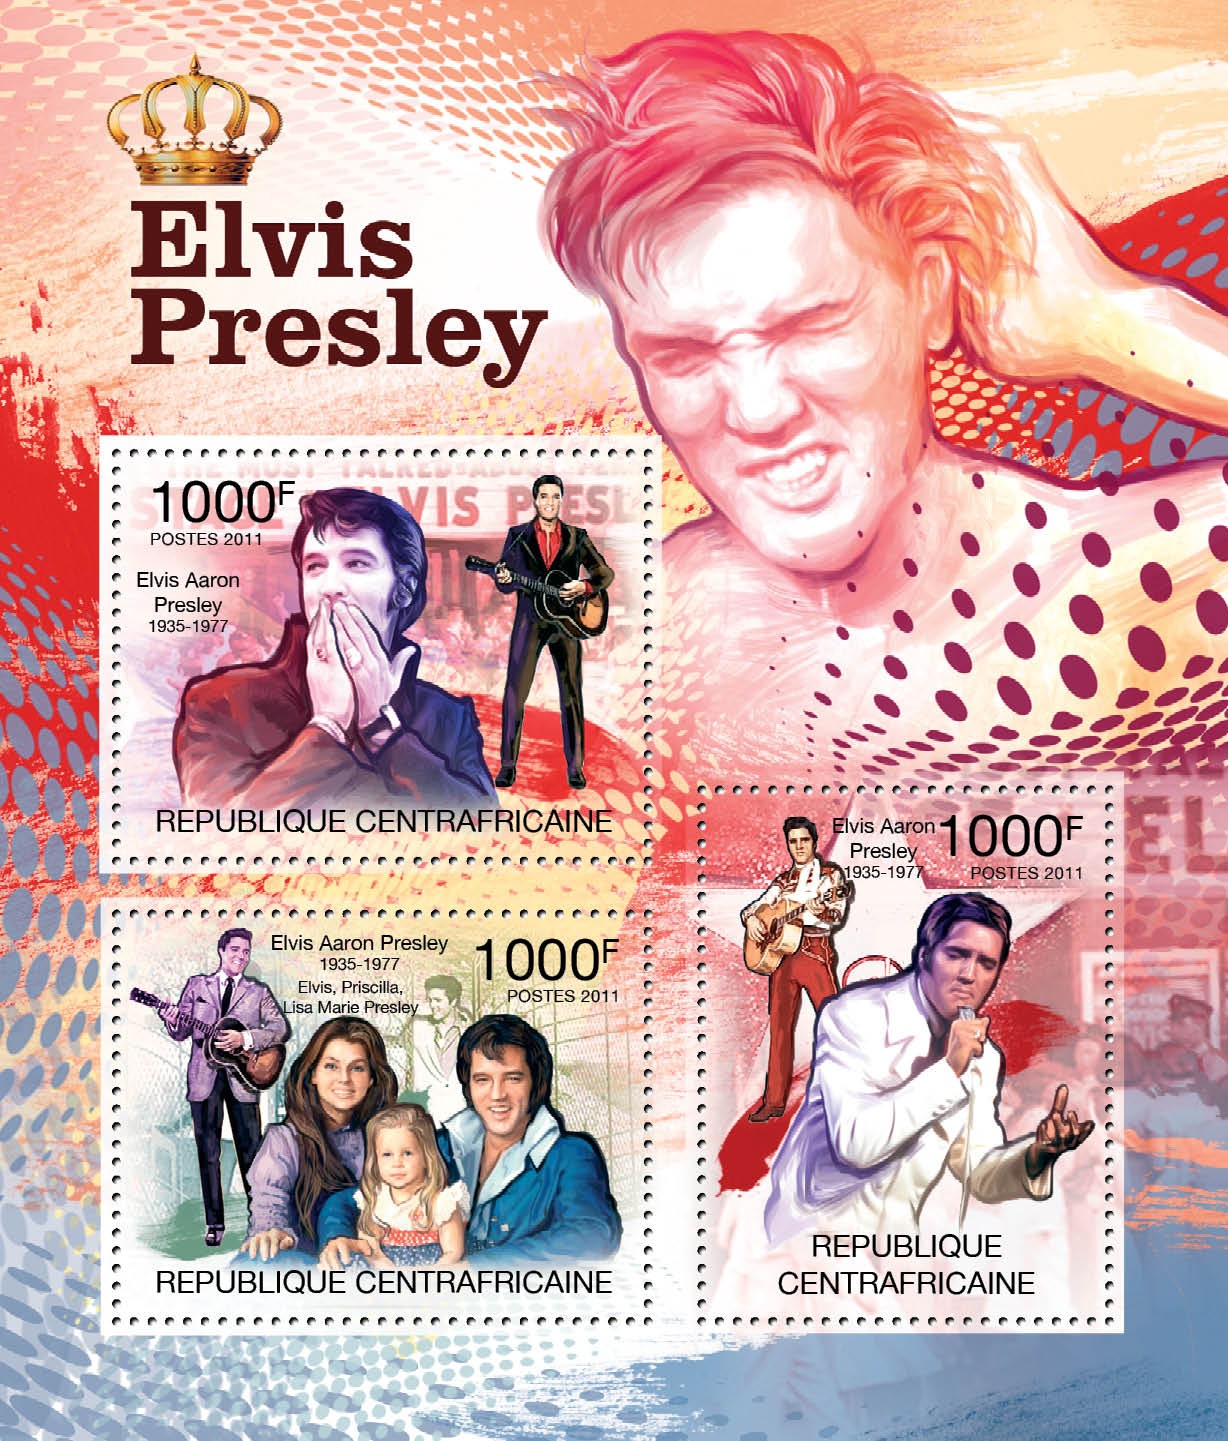 Elvis Presley, (1935-1977). - Issue of Central African republic postage stamps